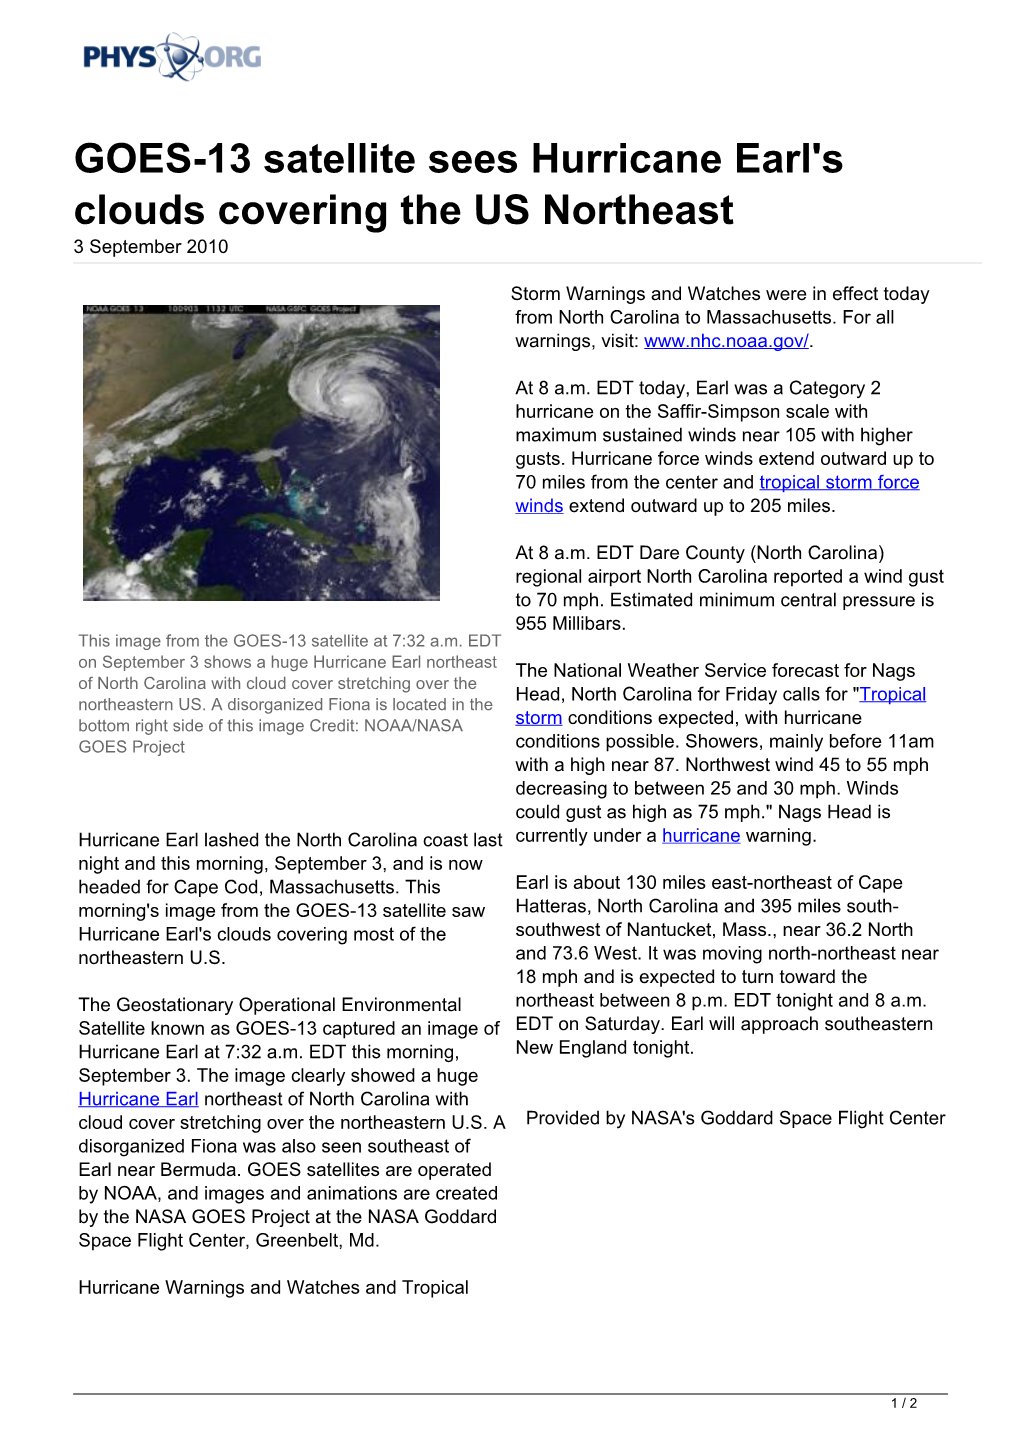 GOES-13 Satellite Sees Hurricane Earl's Clouds Covering the US Northeast 3 September 2010